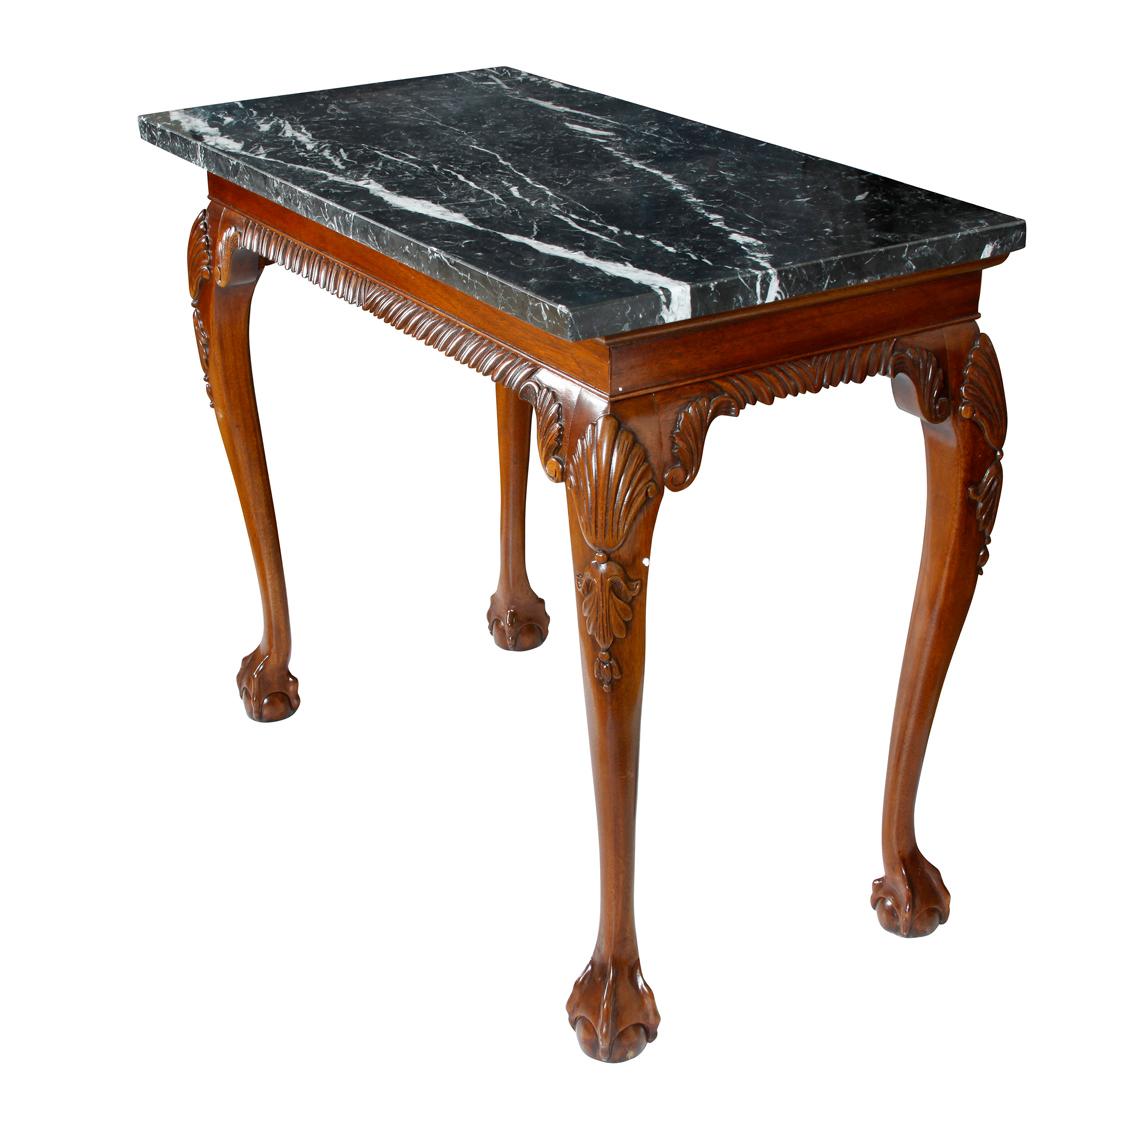 George III style walnut console with black marble top and ball and claw feet.